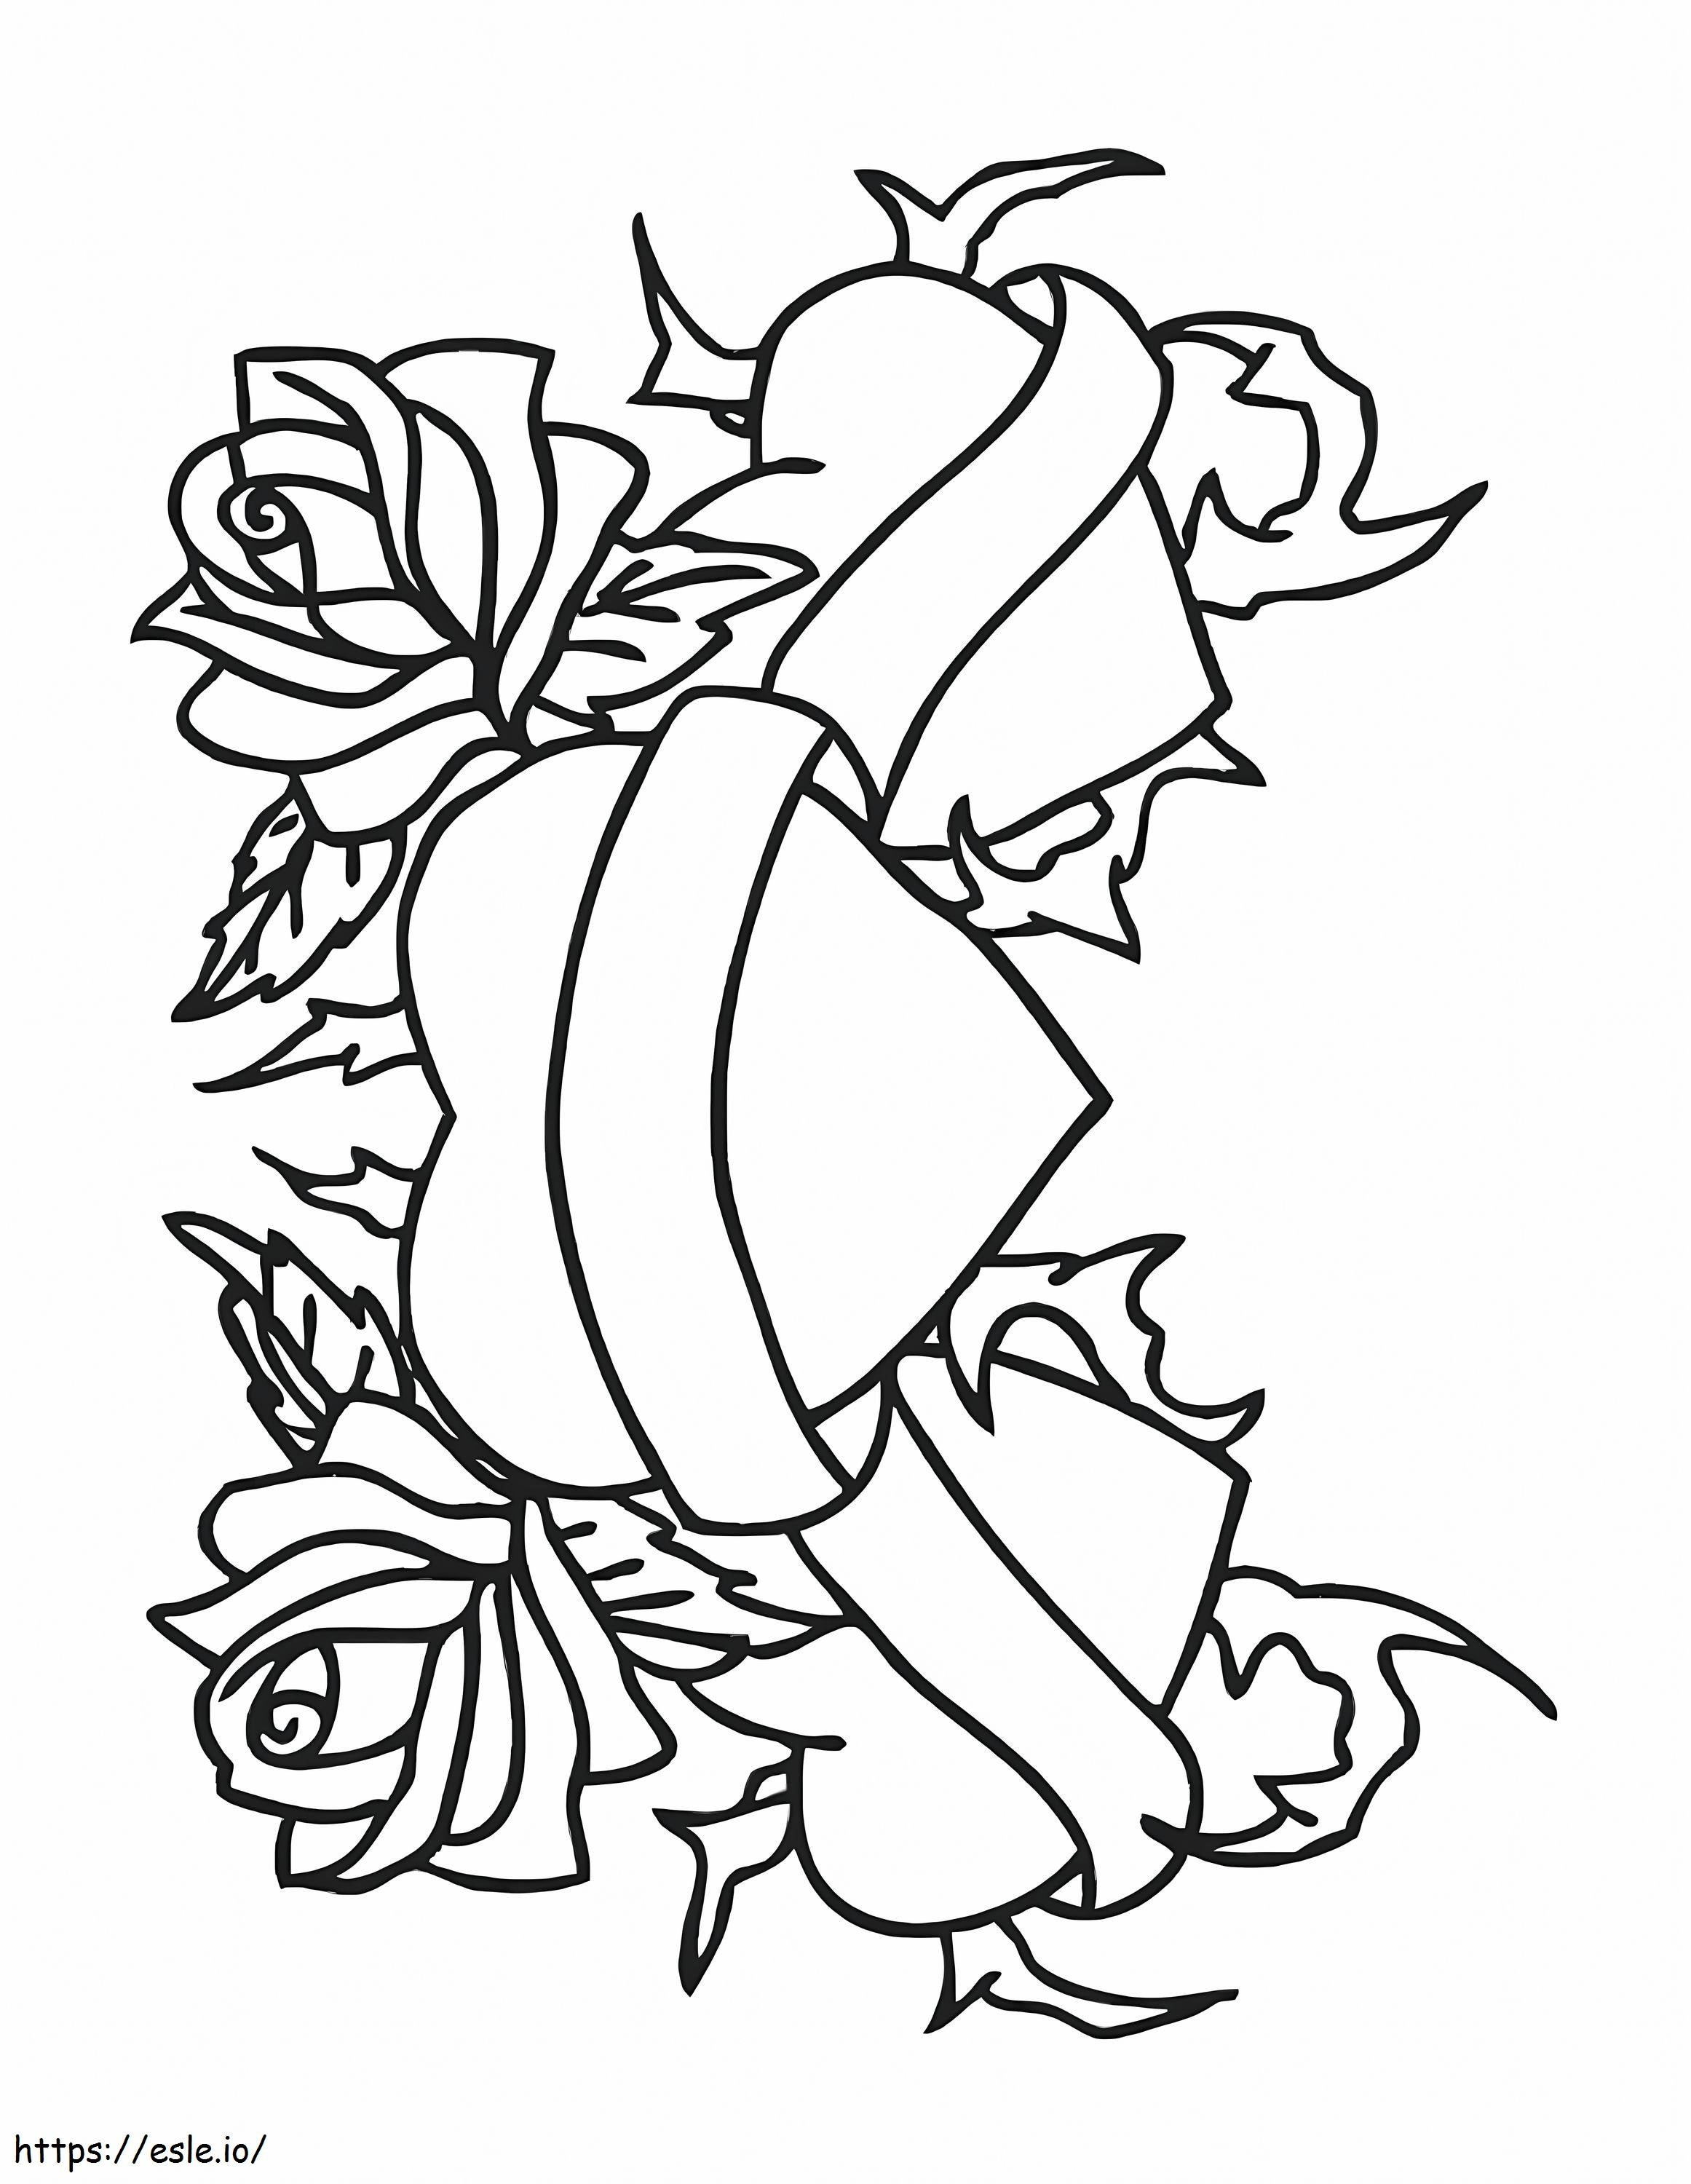 Roses With Hearts coloring page